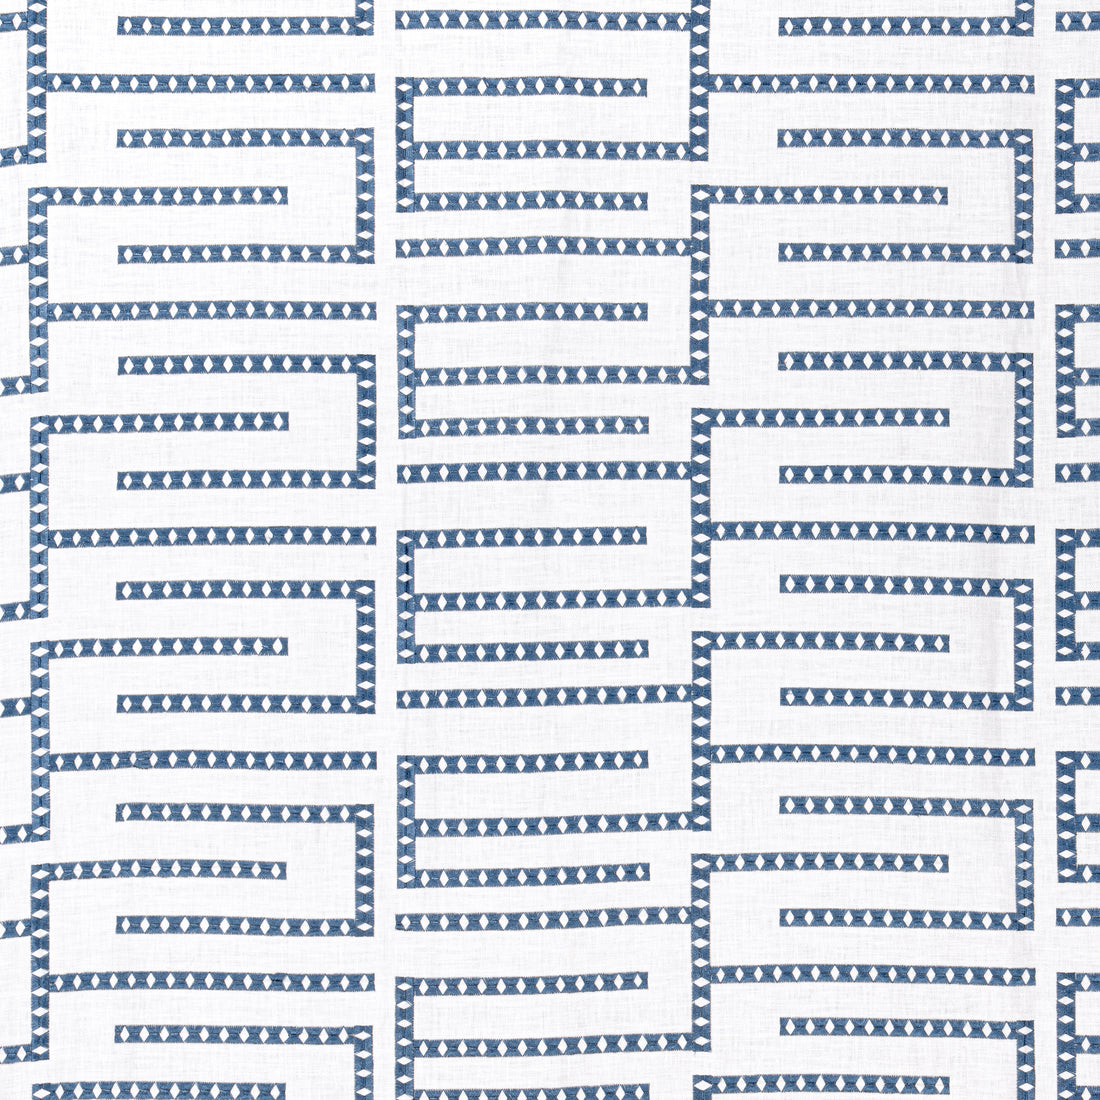 Architect Embroidery fabric in blue - pattern number W713627 - by Thibaut in the Grand Palace collection